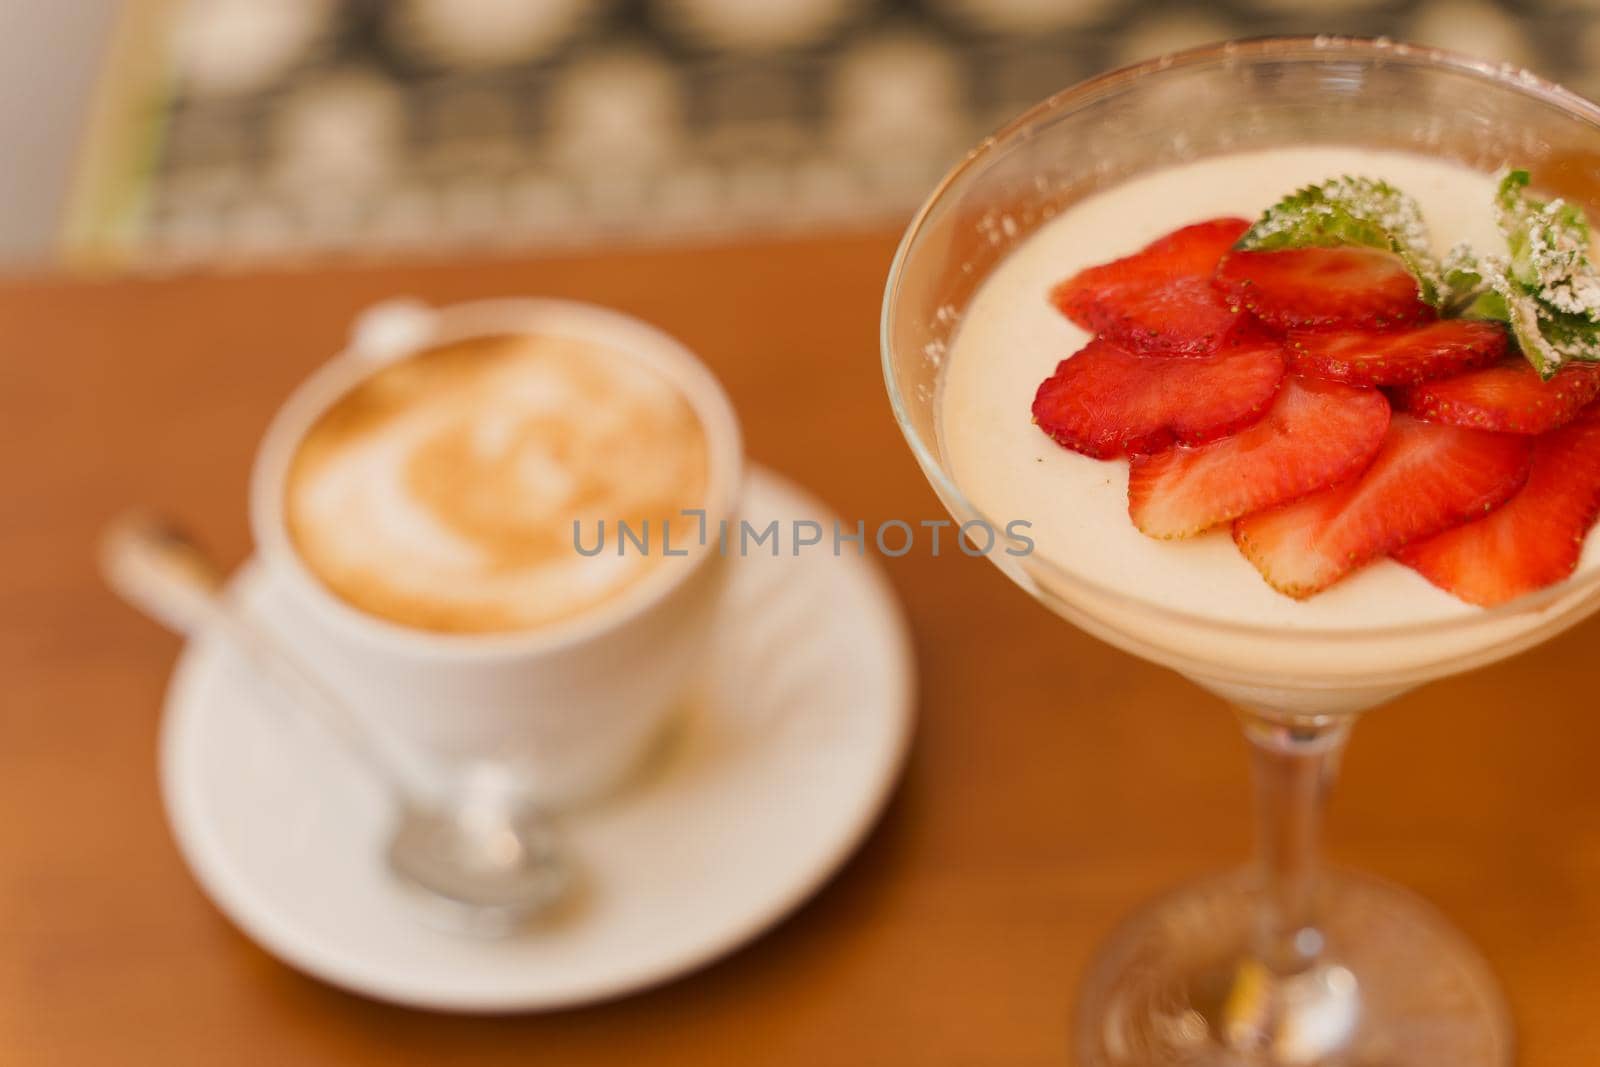 Creamy dessert with strawberries in glass, cappuccino on wooden table. Appetizing dessert and latte on the background of the restaurant.